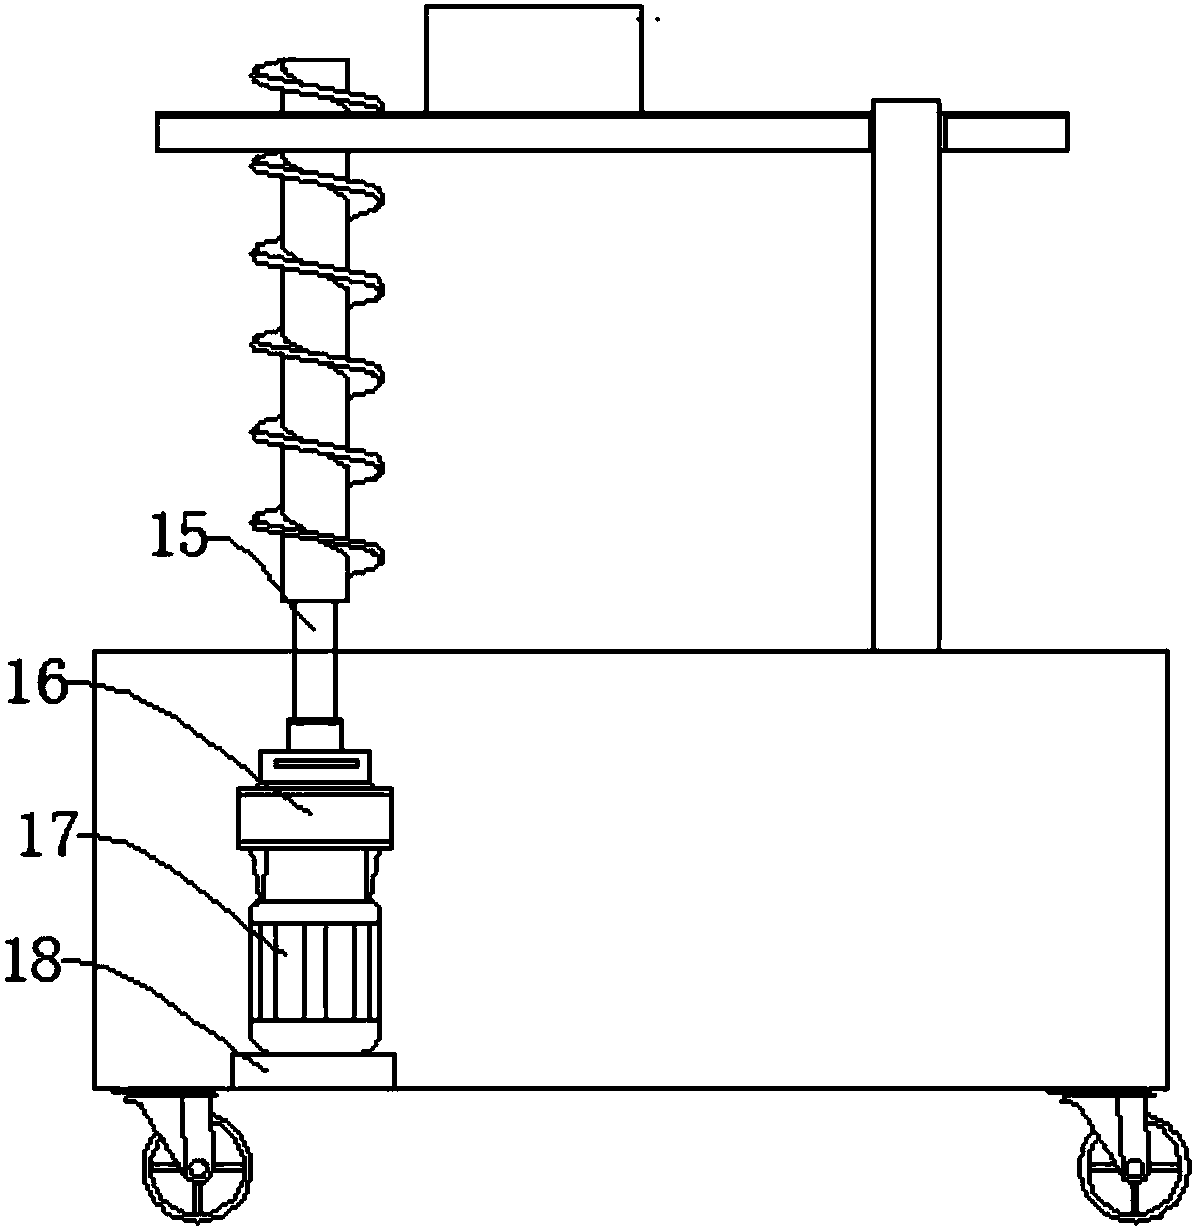 Lifter for ceramic making